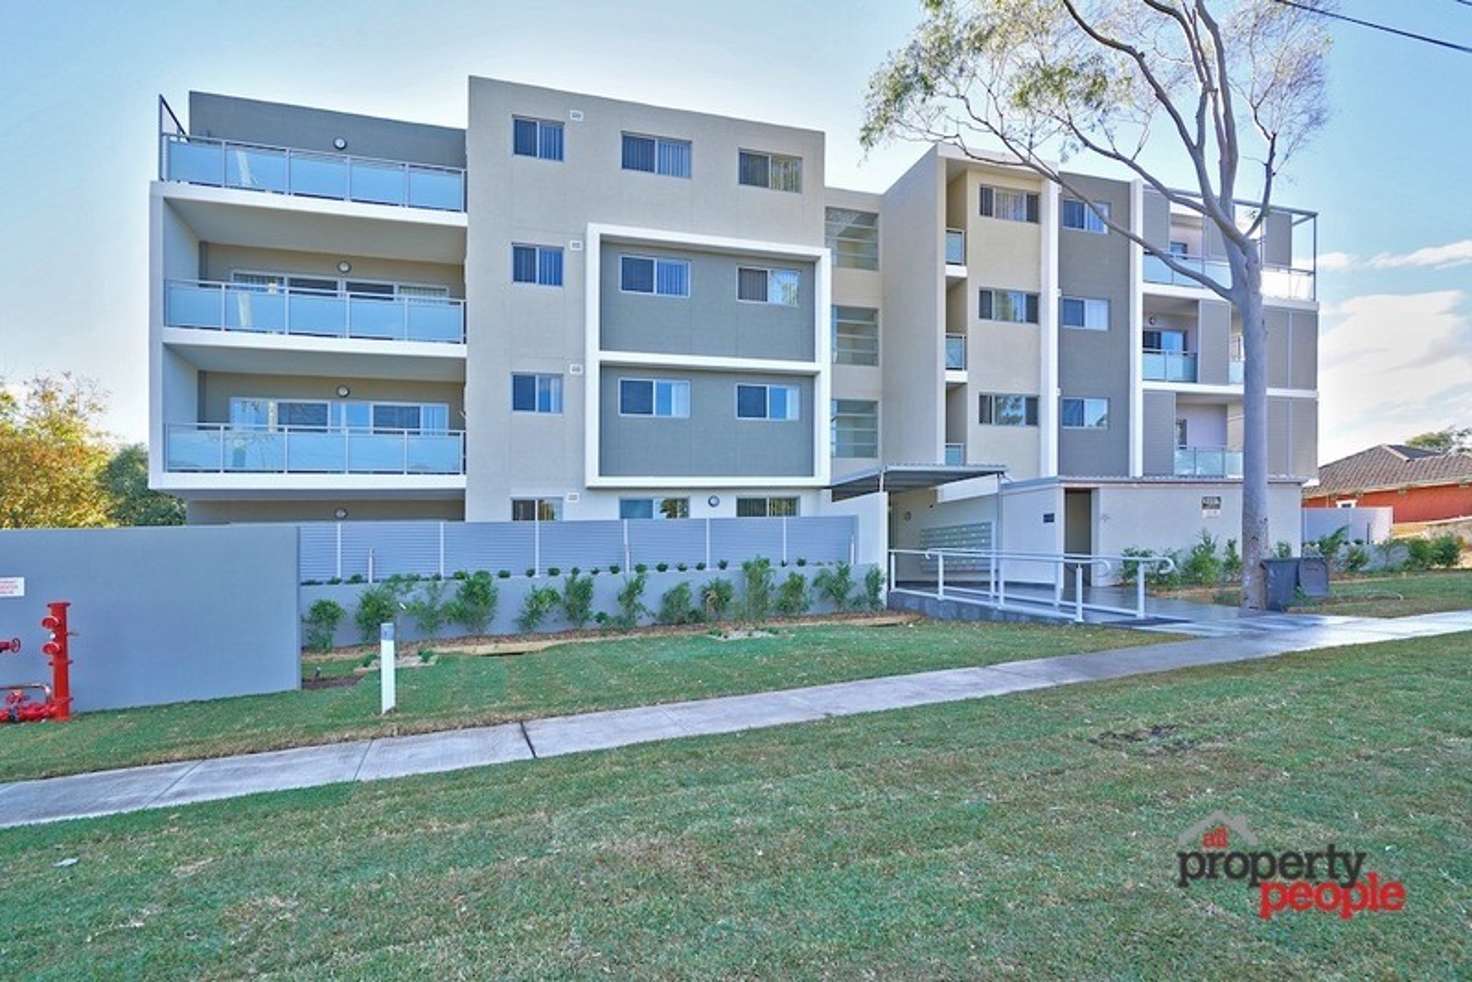 Main view of Homely unit listing, 54/31-33 Cumberland Road, Ingleburn NSW 2565